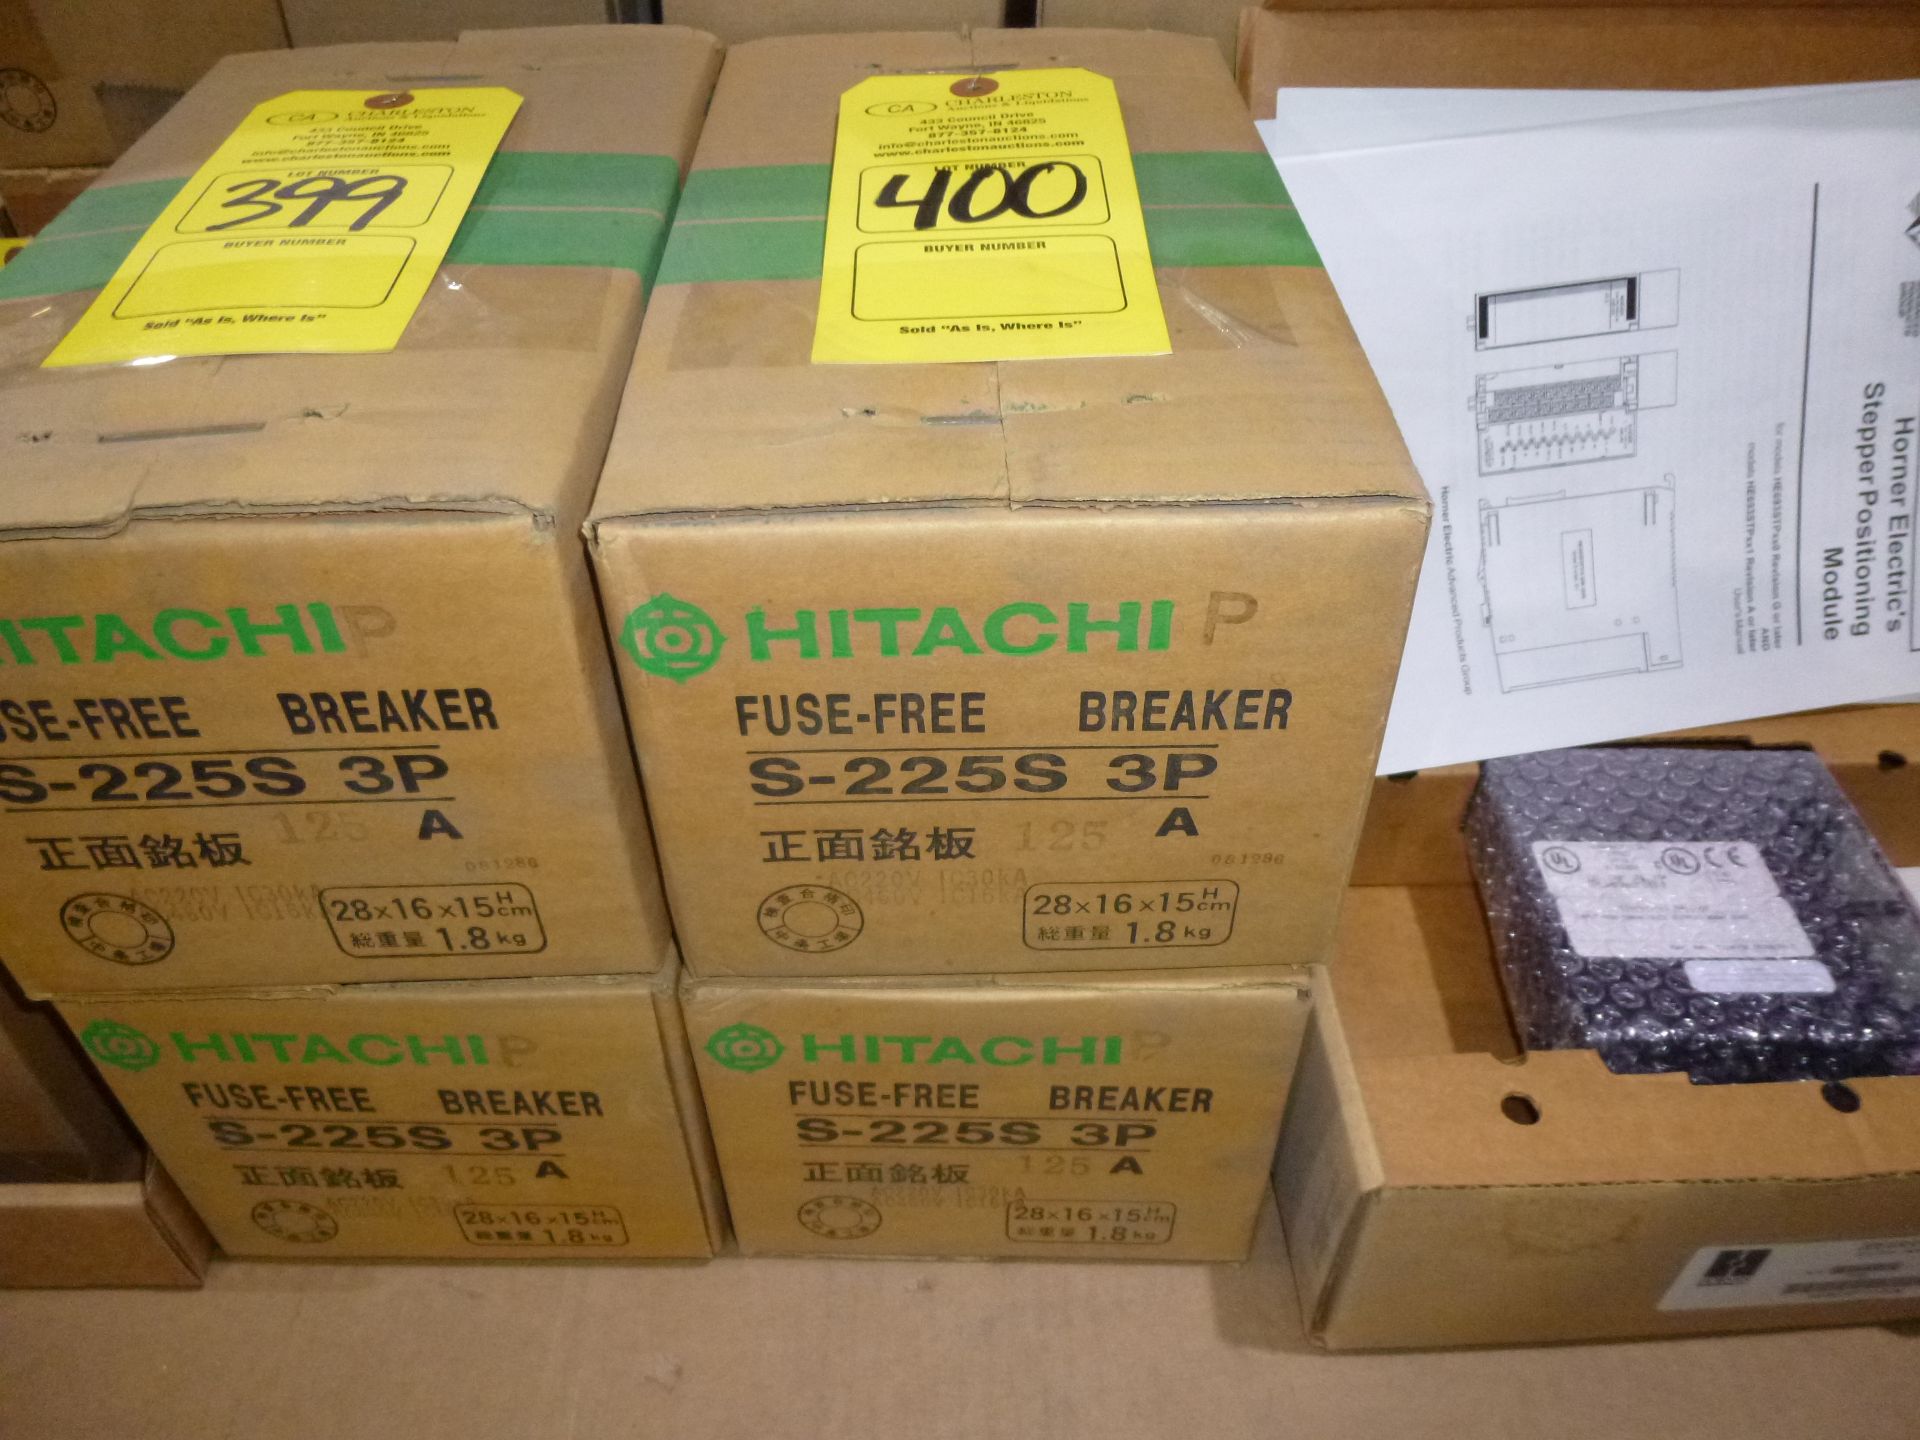 Qty 2 Hitachi breaker Model S-225S, 125amp new in boxes, as always with Brolyn LLC auctions, all